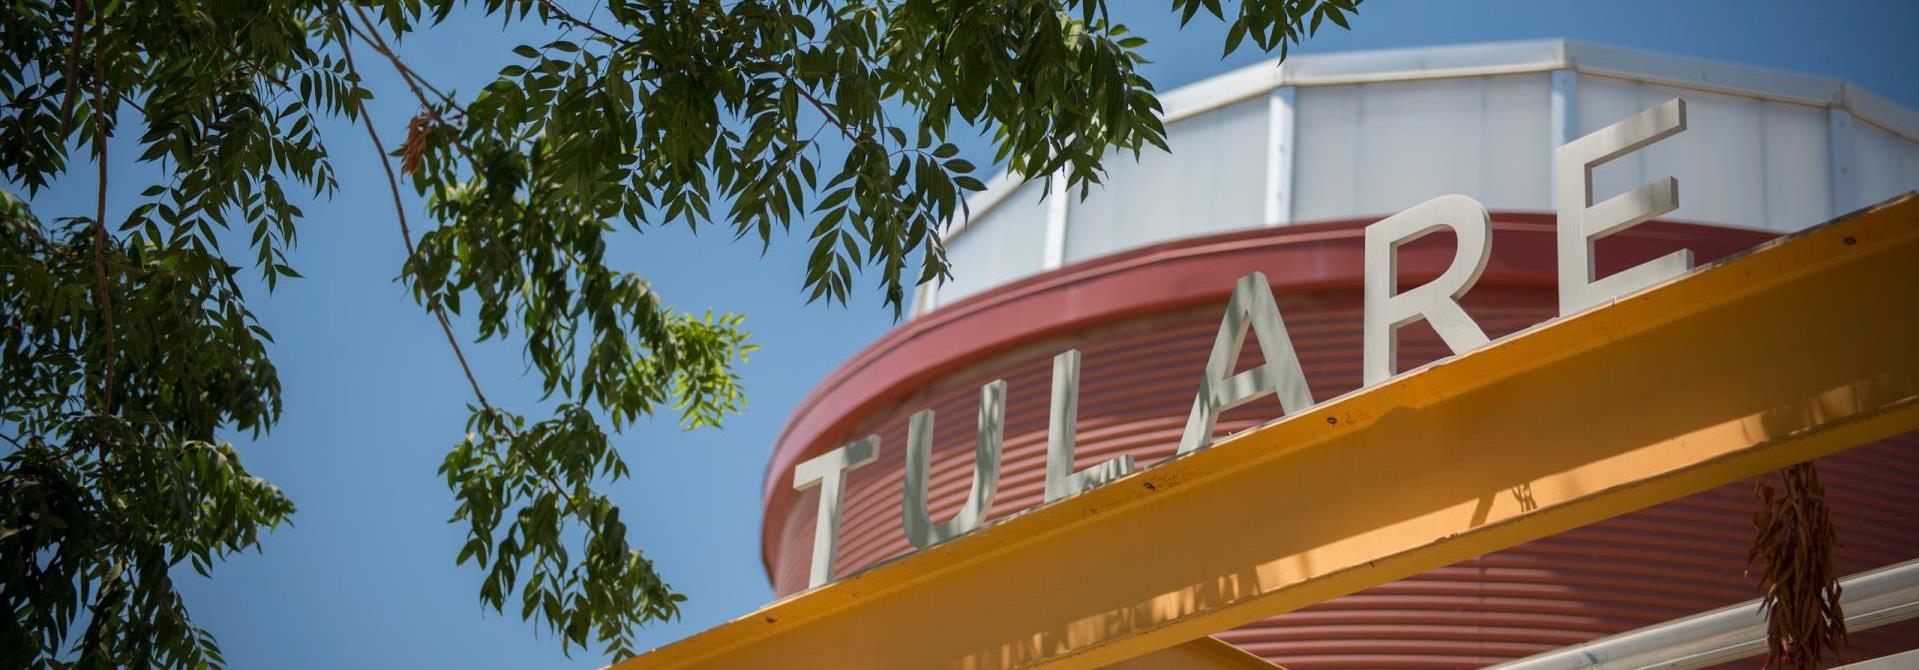 Signage of the word "Tulare" on top of a building